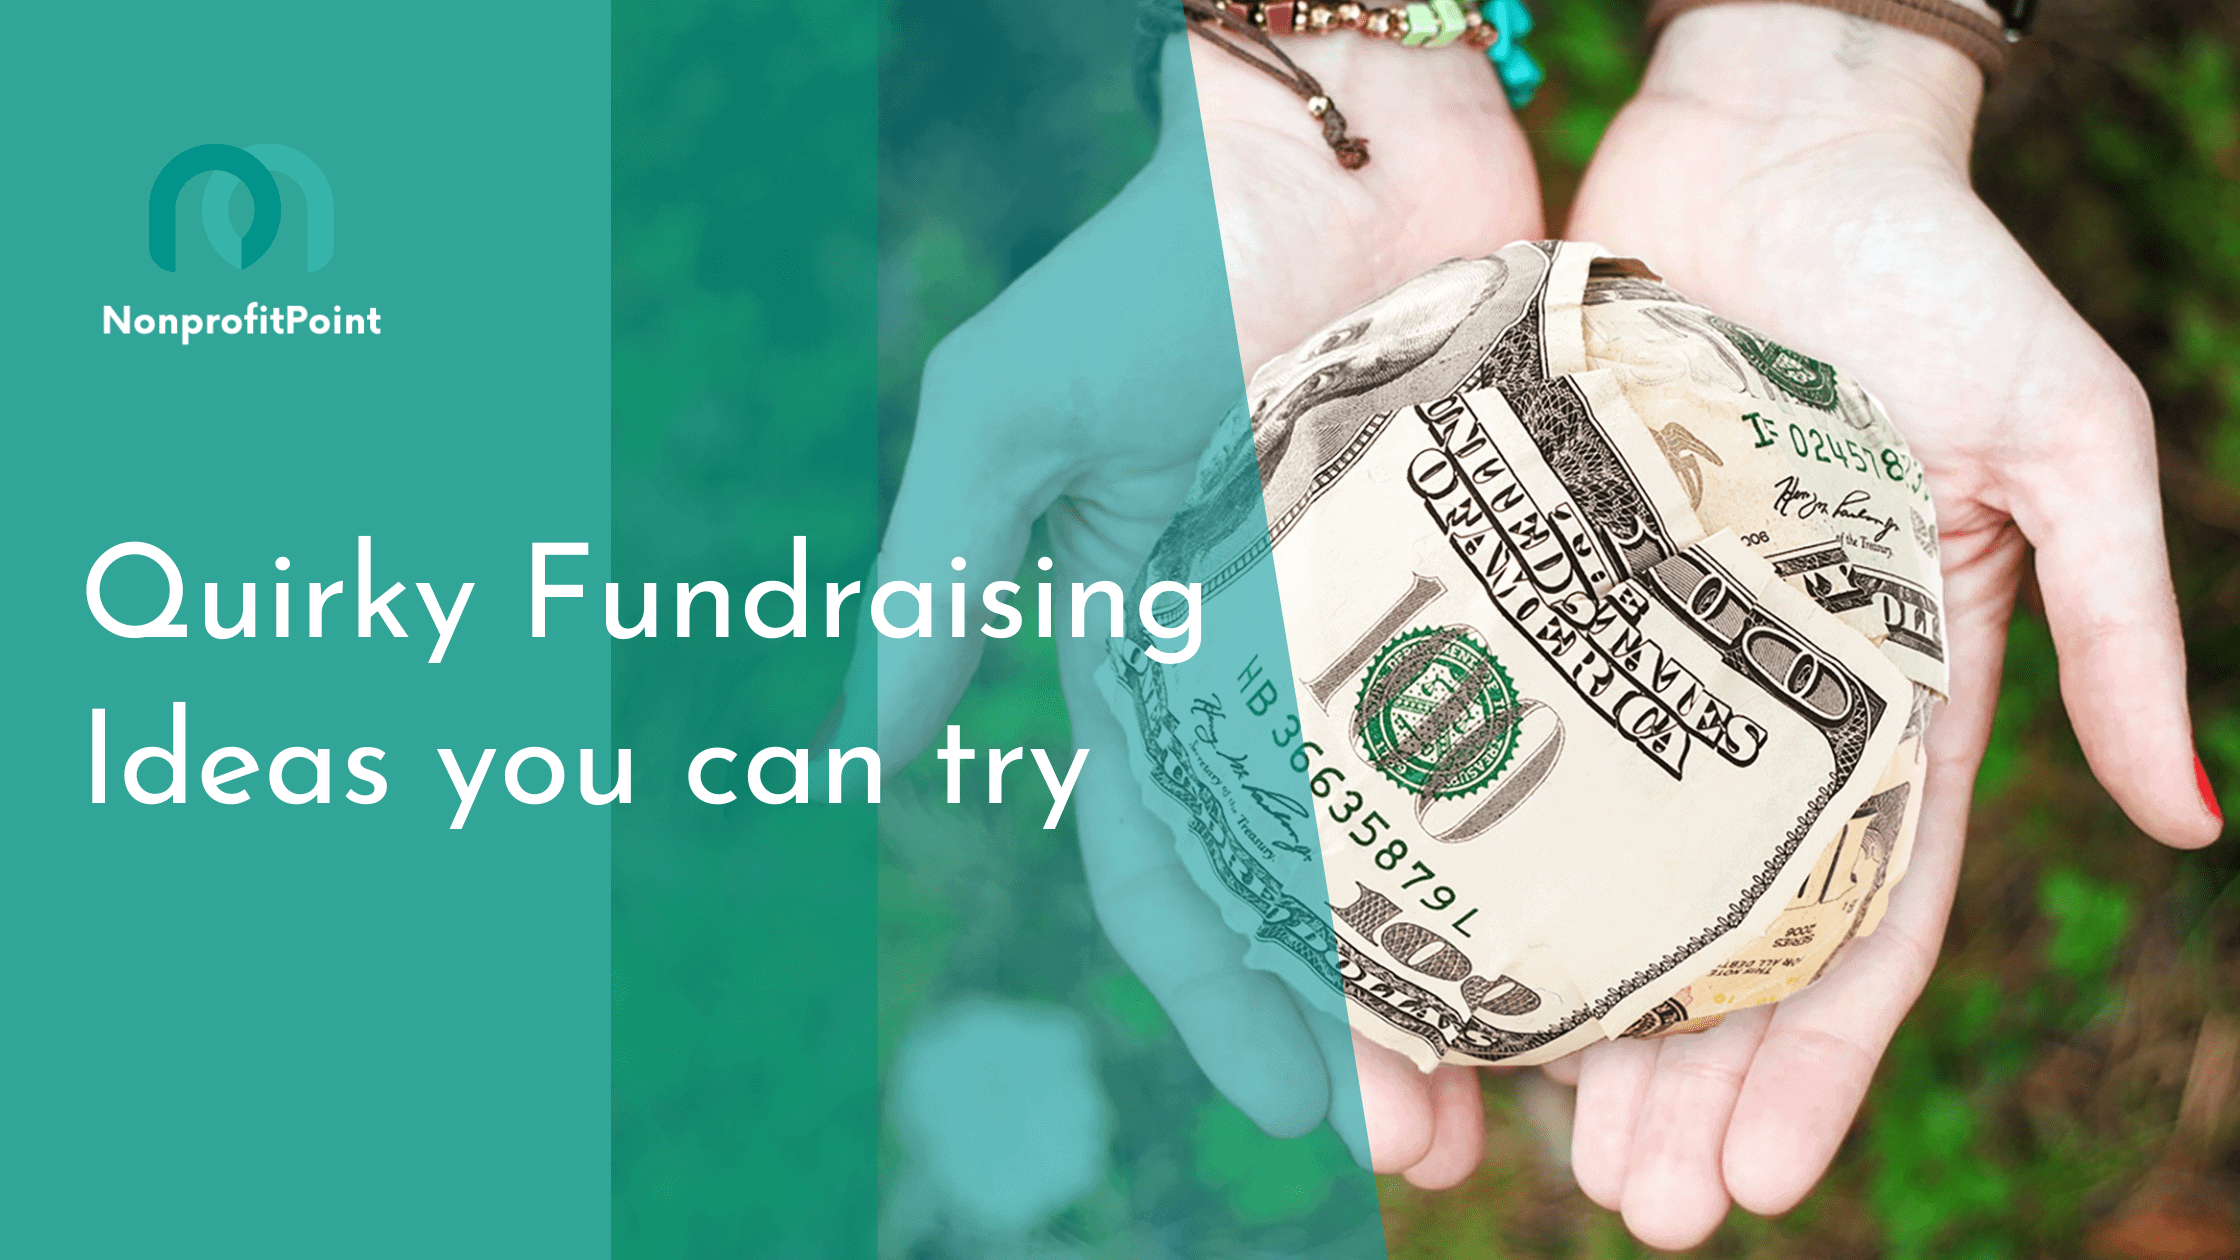 Quirky Fundraising Ideas you can try